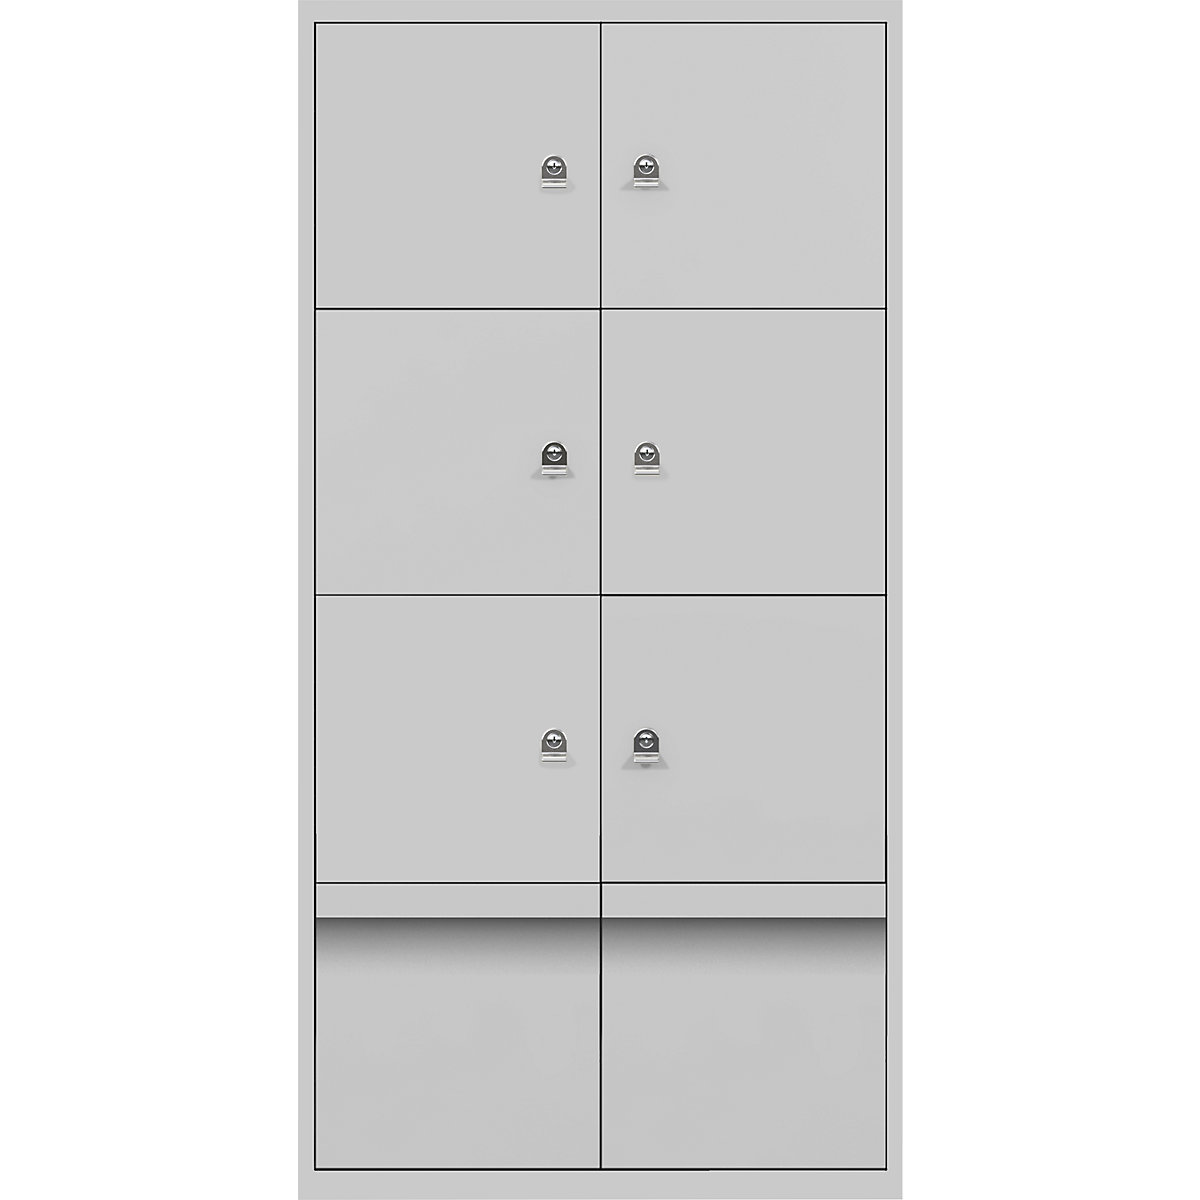 BISLEY – LateralFile™ lodge, with 6 lockable compartments and 2 drawers, height 375 mm each, goose grey